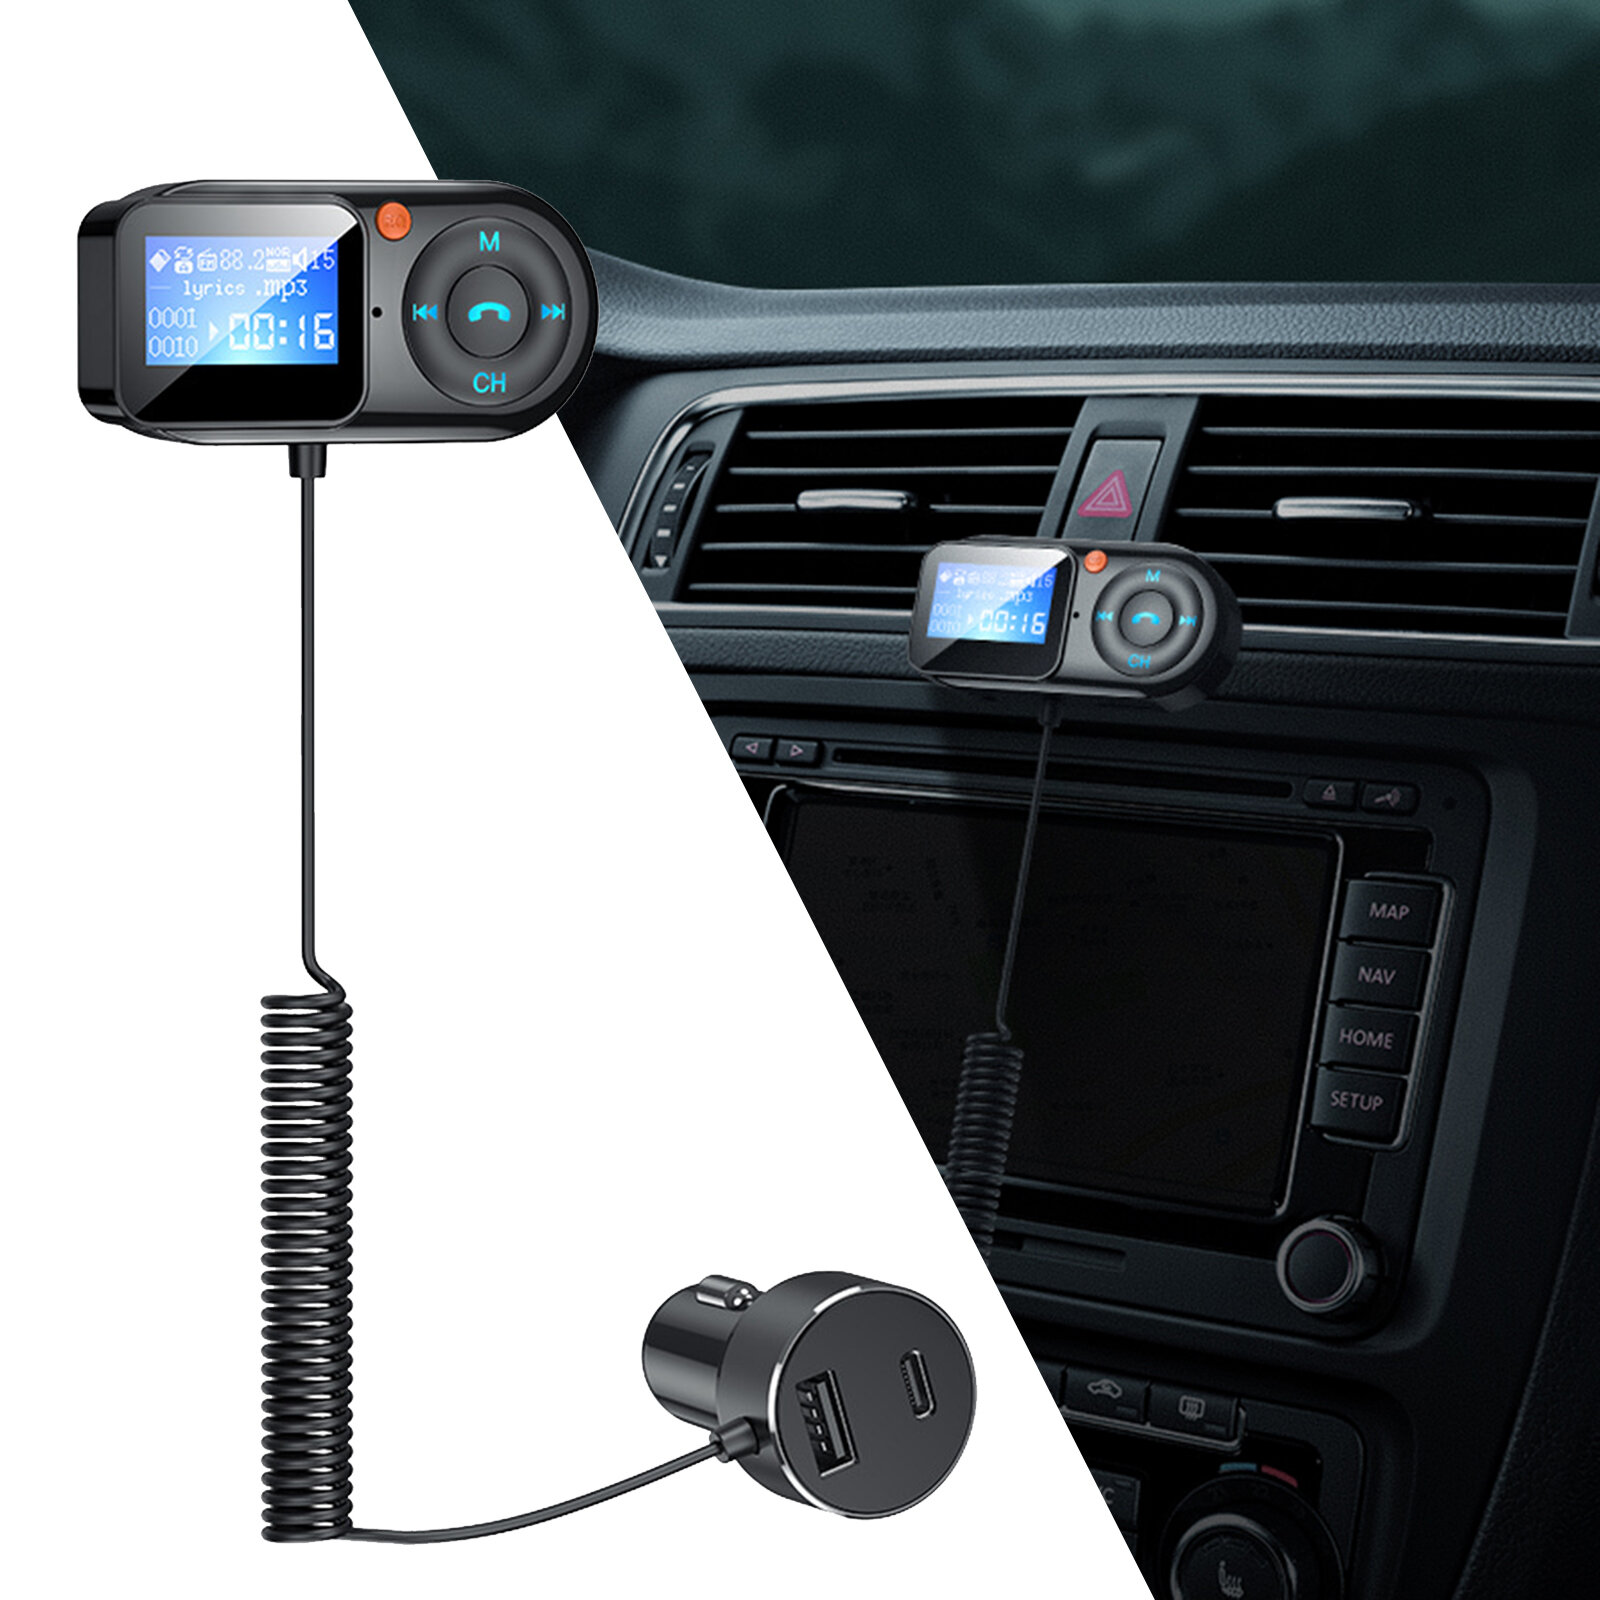 Bakeey T1 Car FM Transmitter bluetooth MP3 Player Handsfree USB Charger Support TF Card Music Player